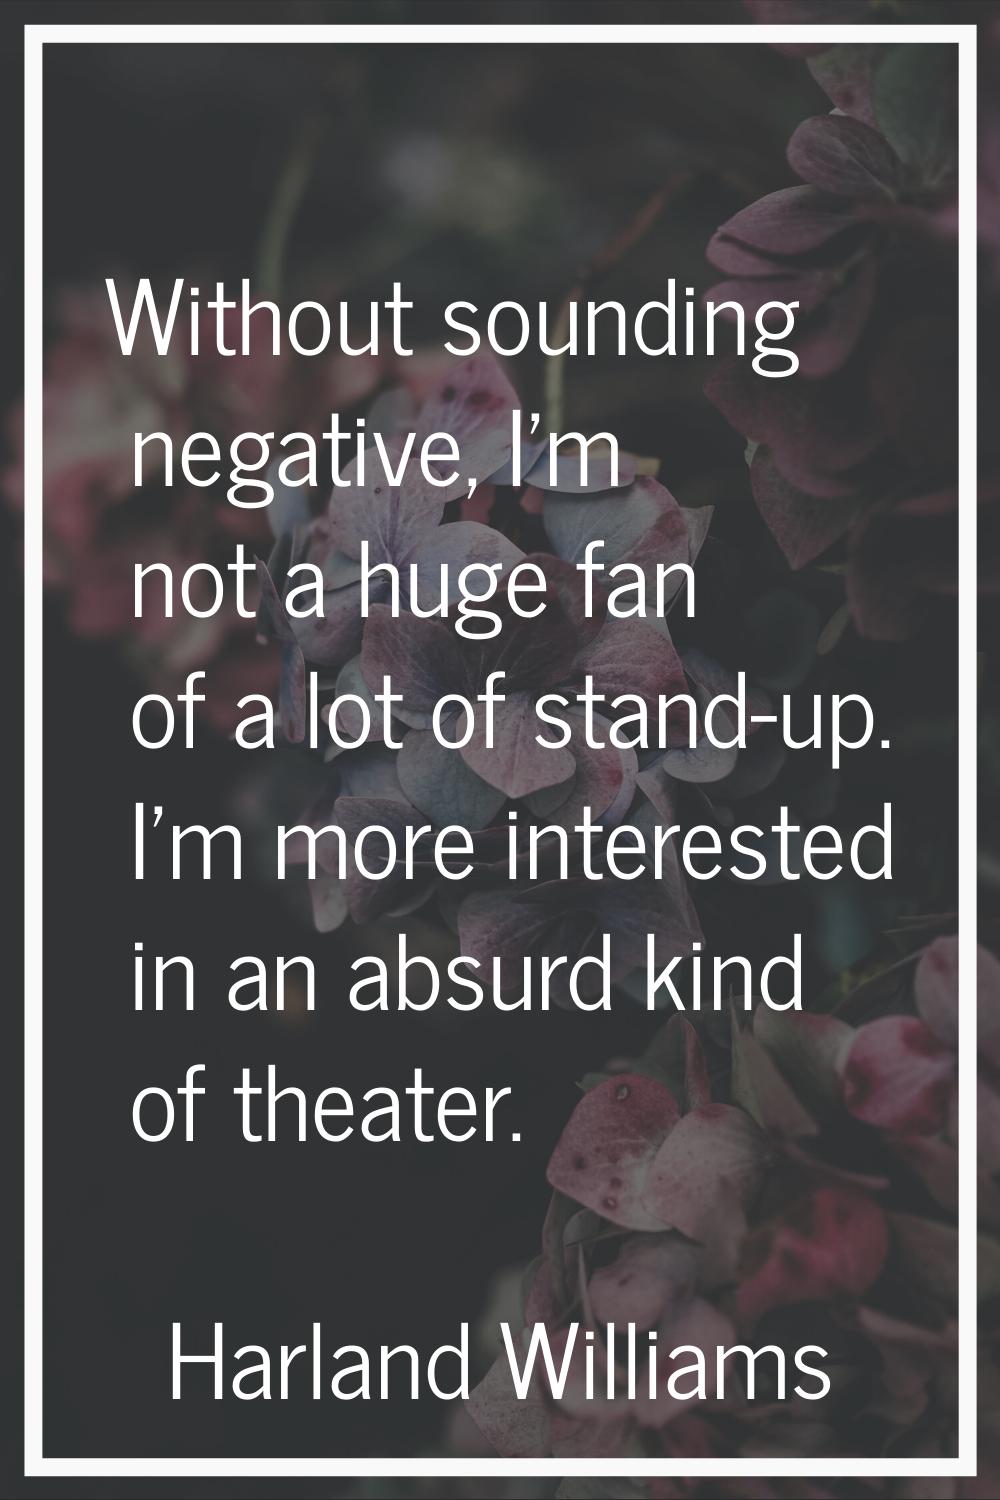 Without sounding negative, I'm not a huge fan of a lot of stand-up. I'm more interested in an absur